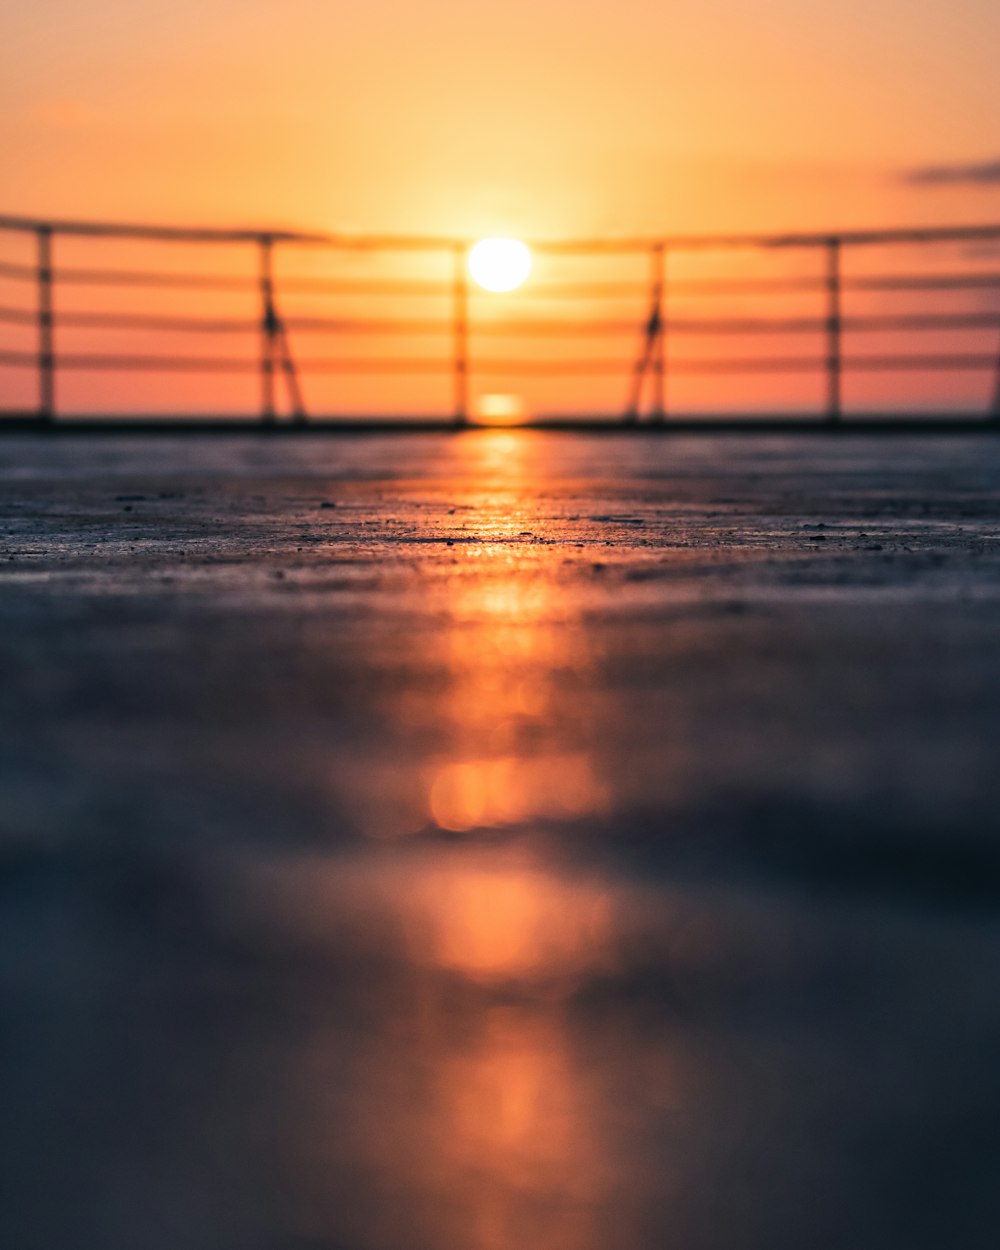 the sun is setting over the ocean with a bridge in the background